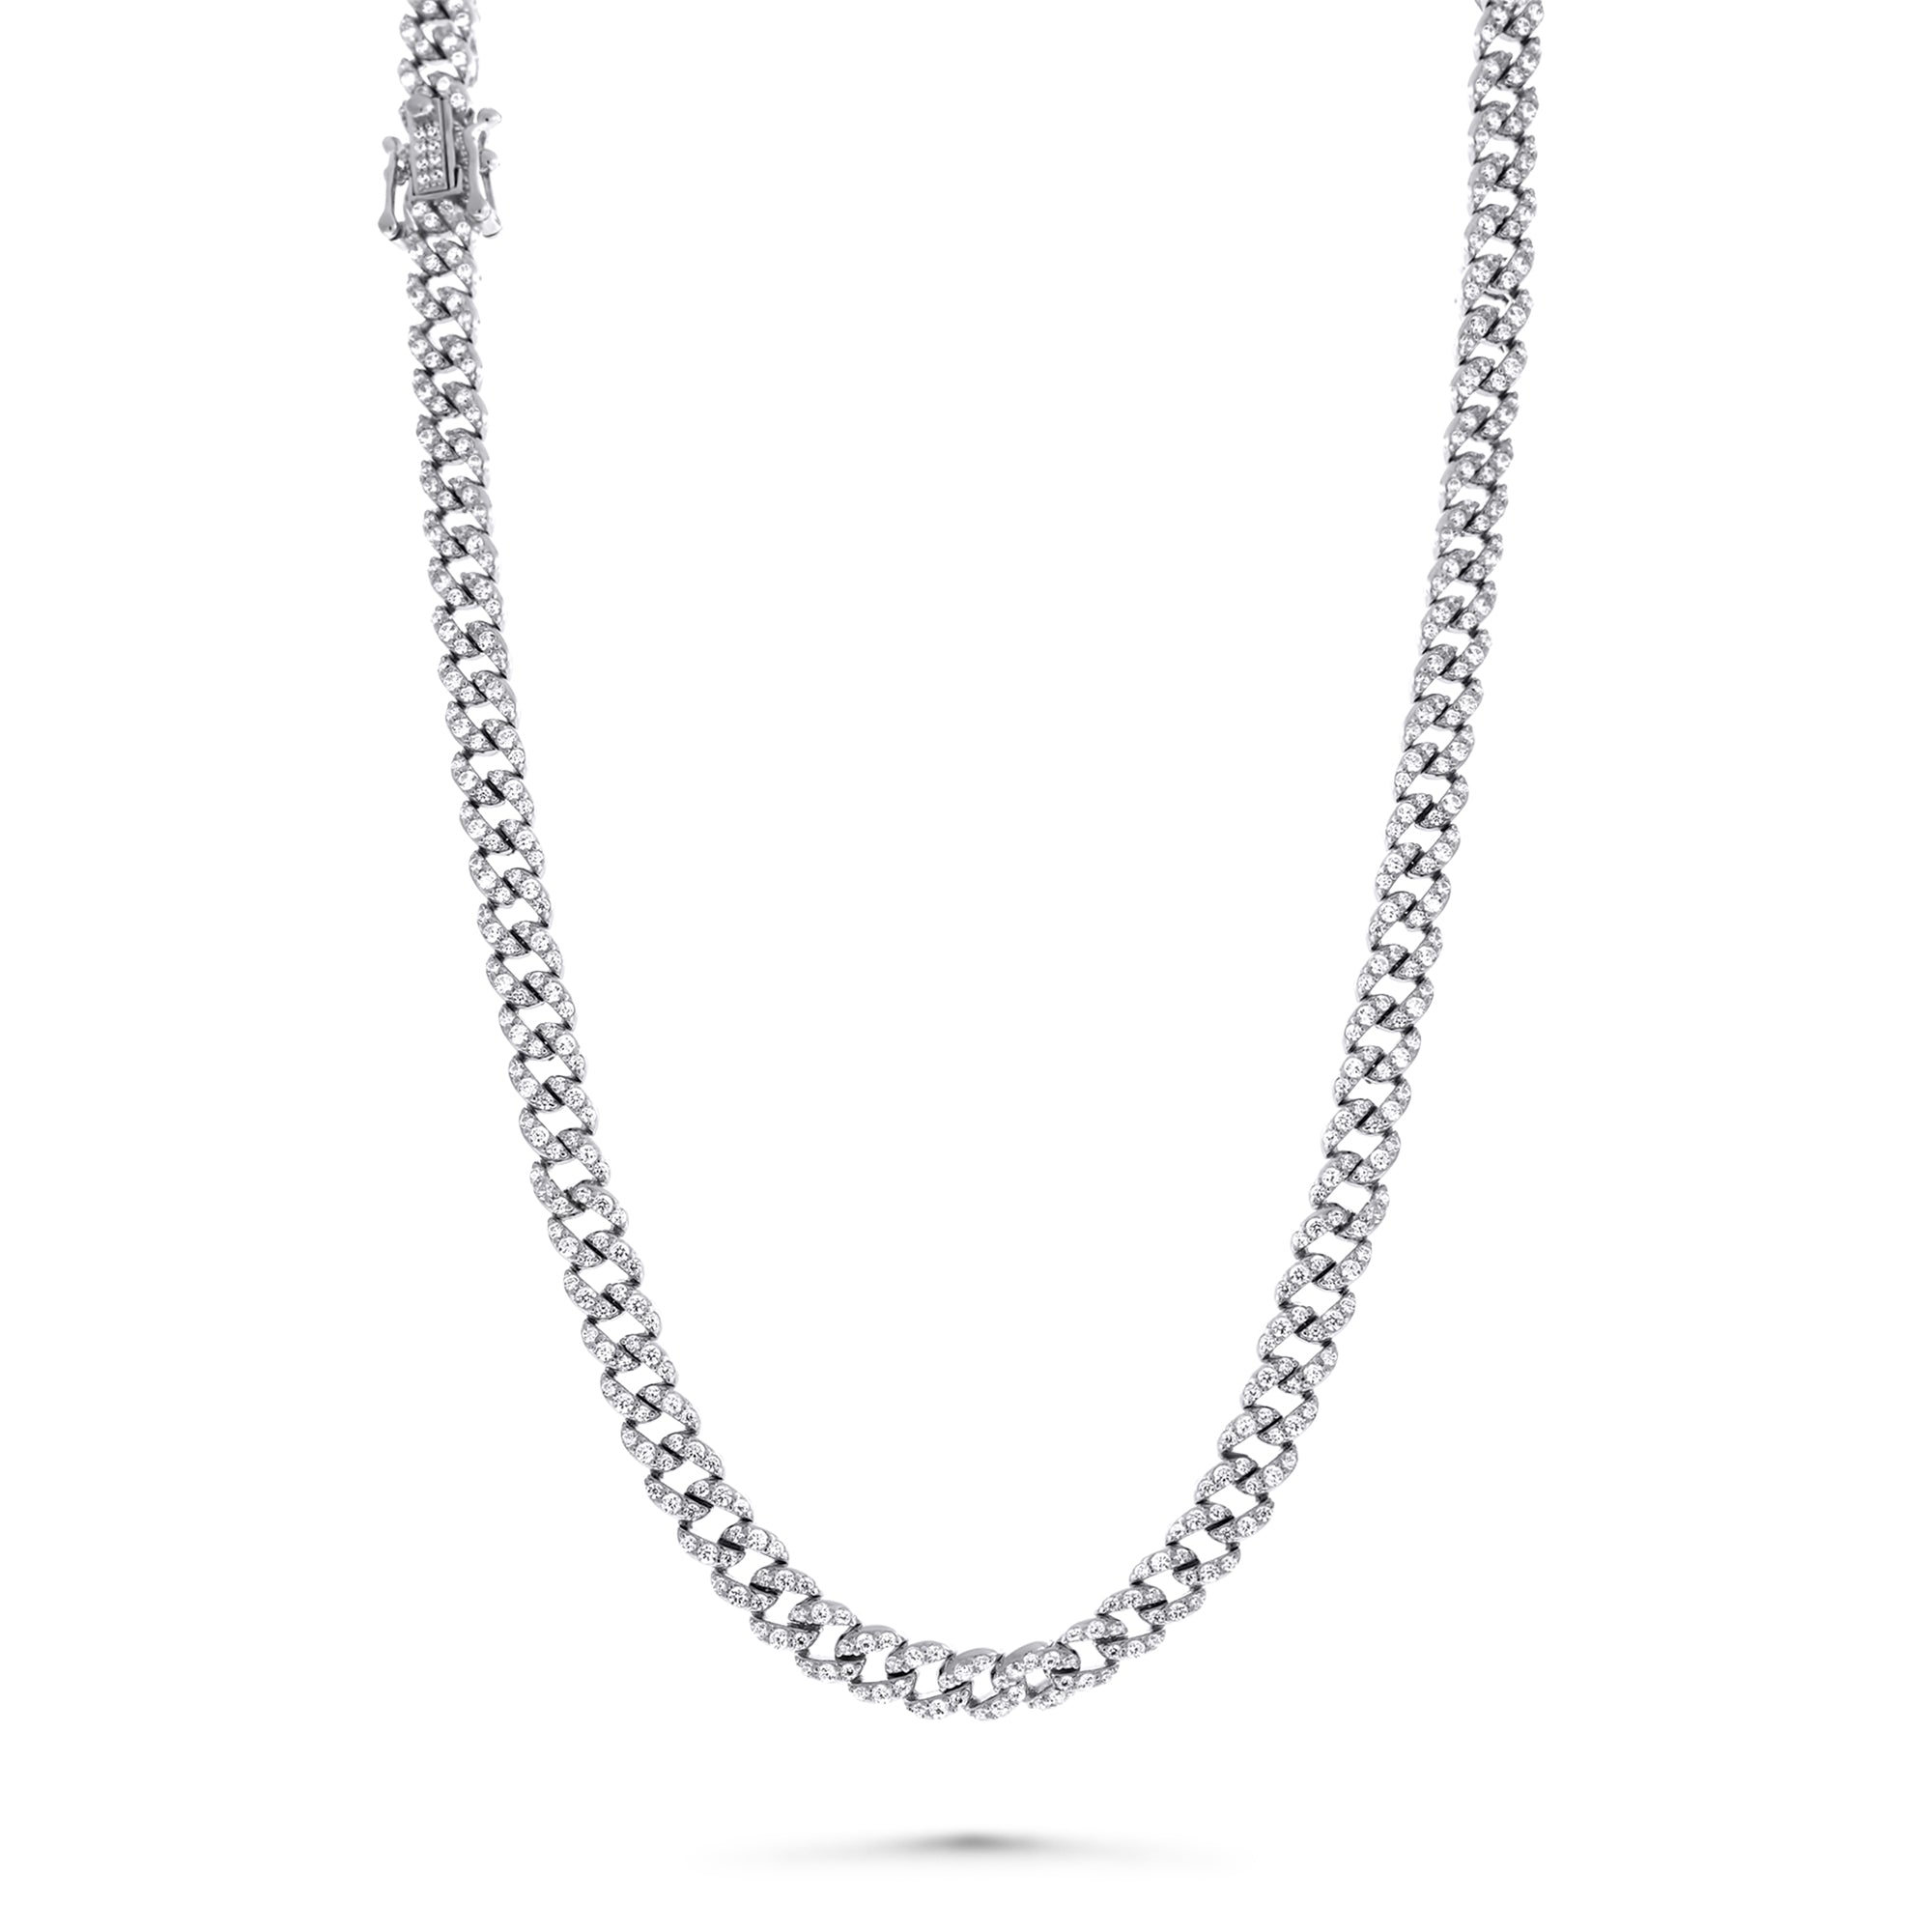 Cuban Chain Necklace Sterling Silver Pave CZ